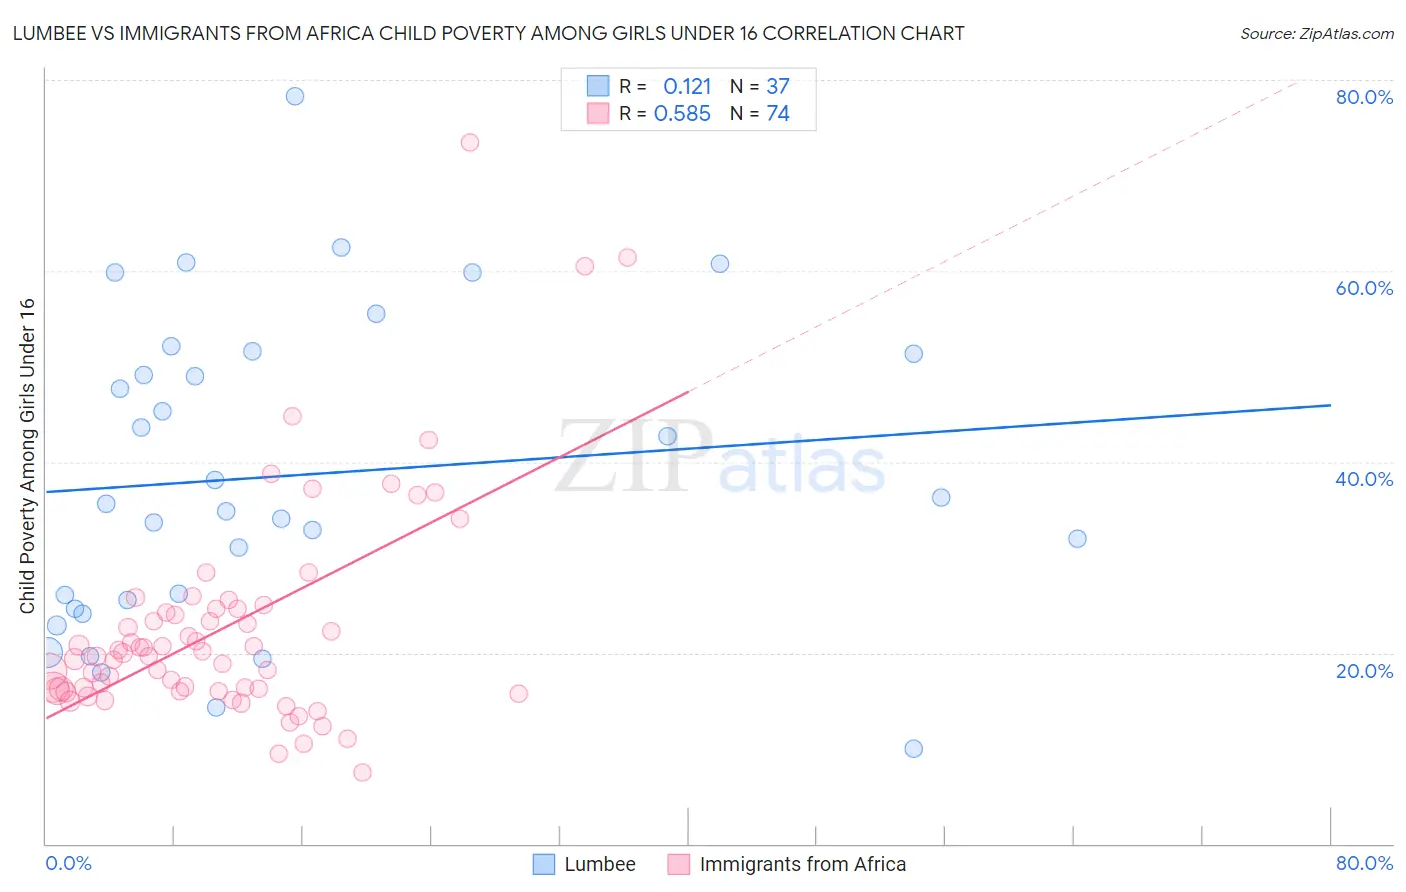 Lumbee vs Immigrants from Africa Child Poverty Among Girls Under 16